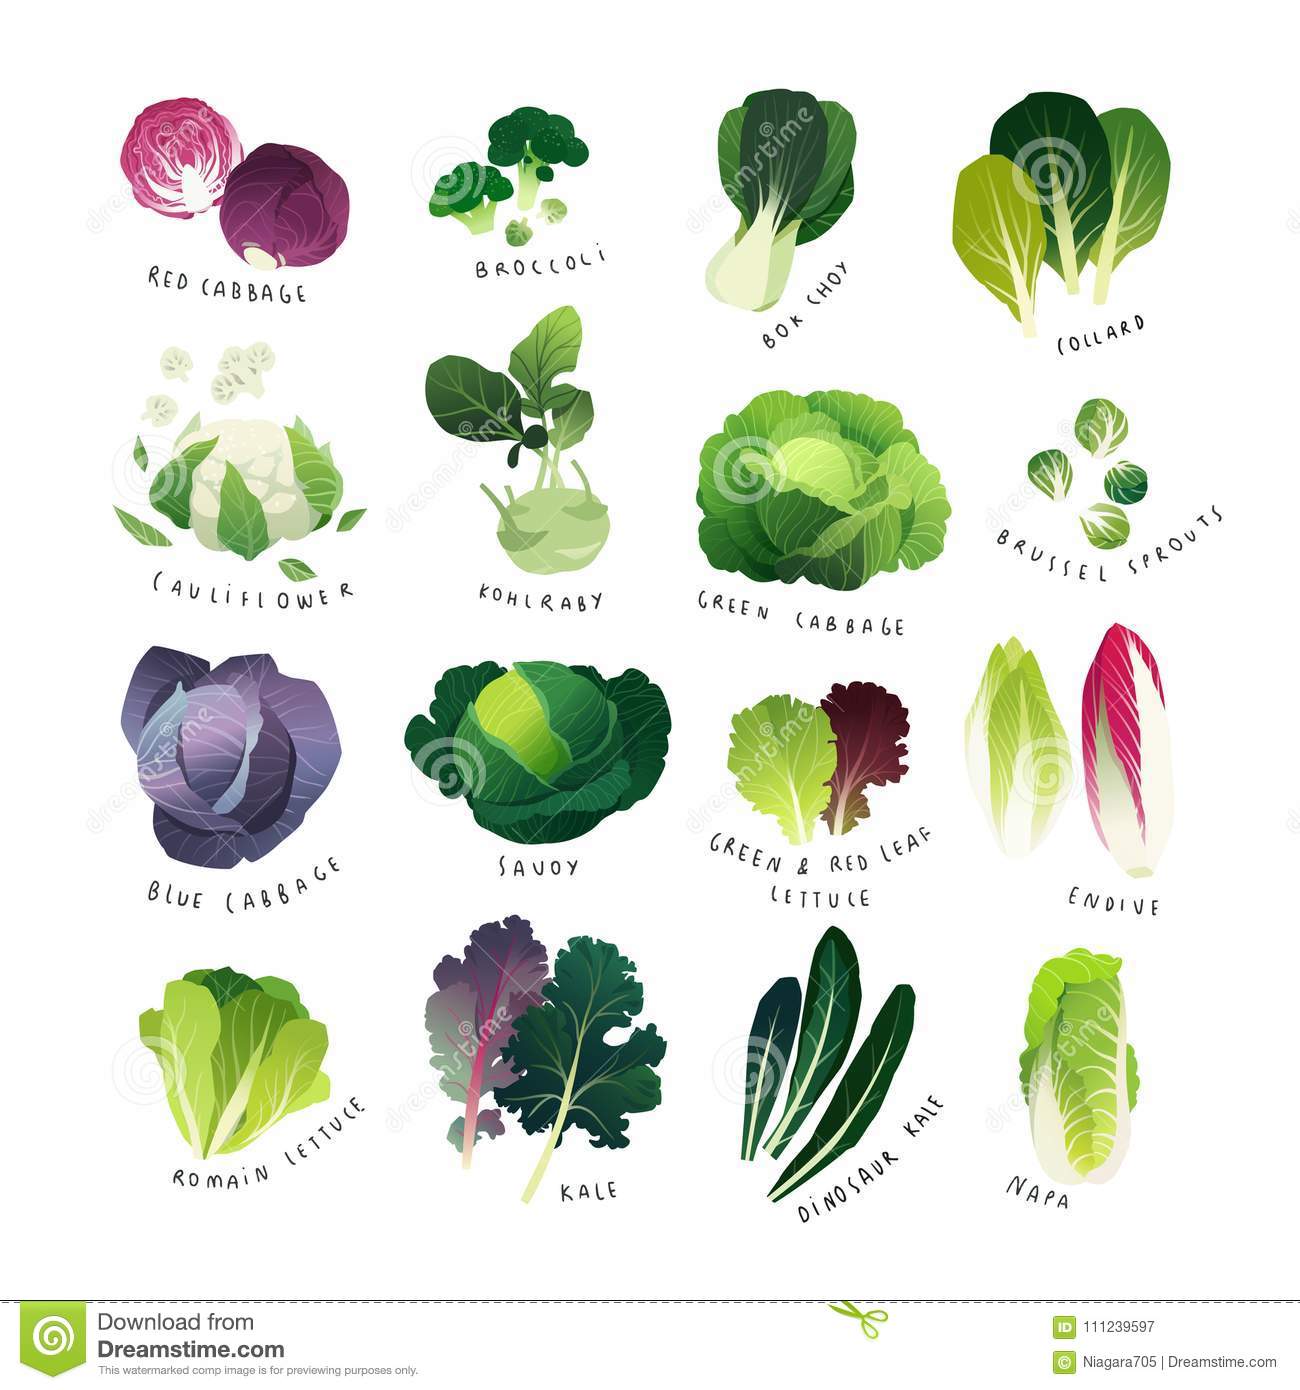 Leafy vegetables clipart.